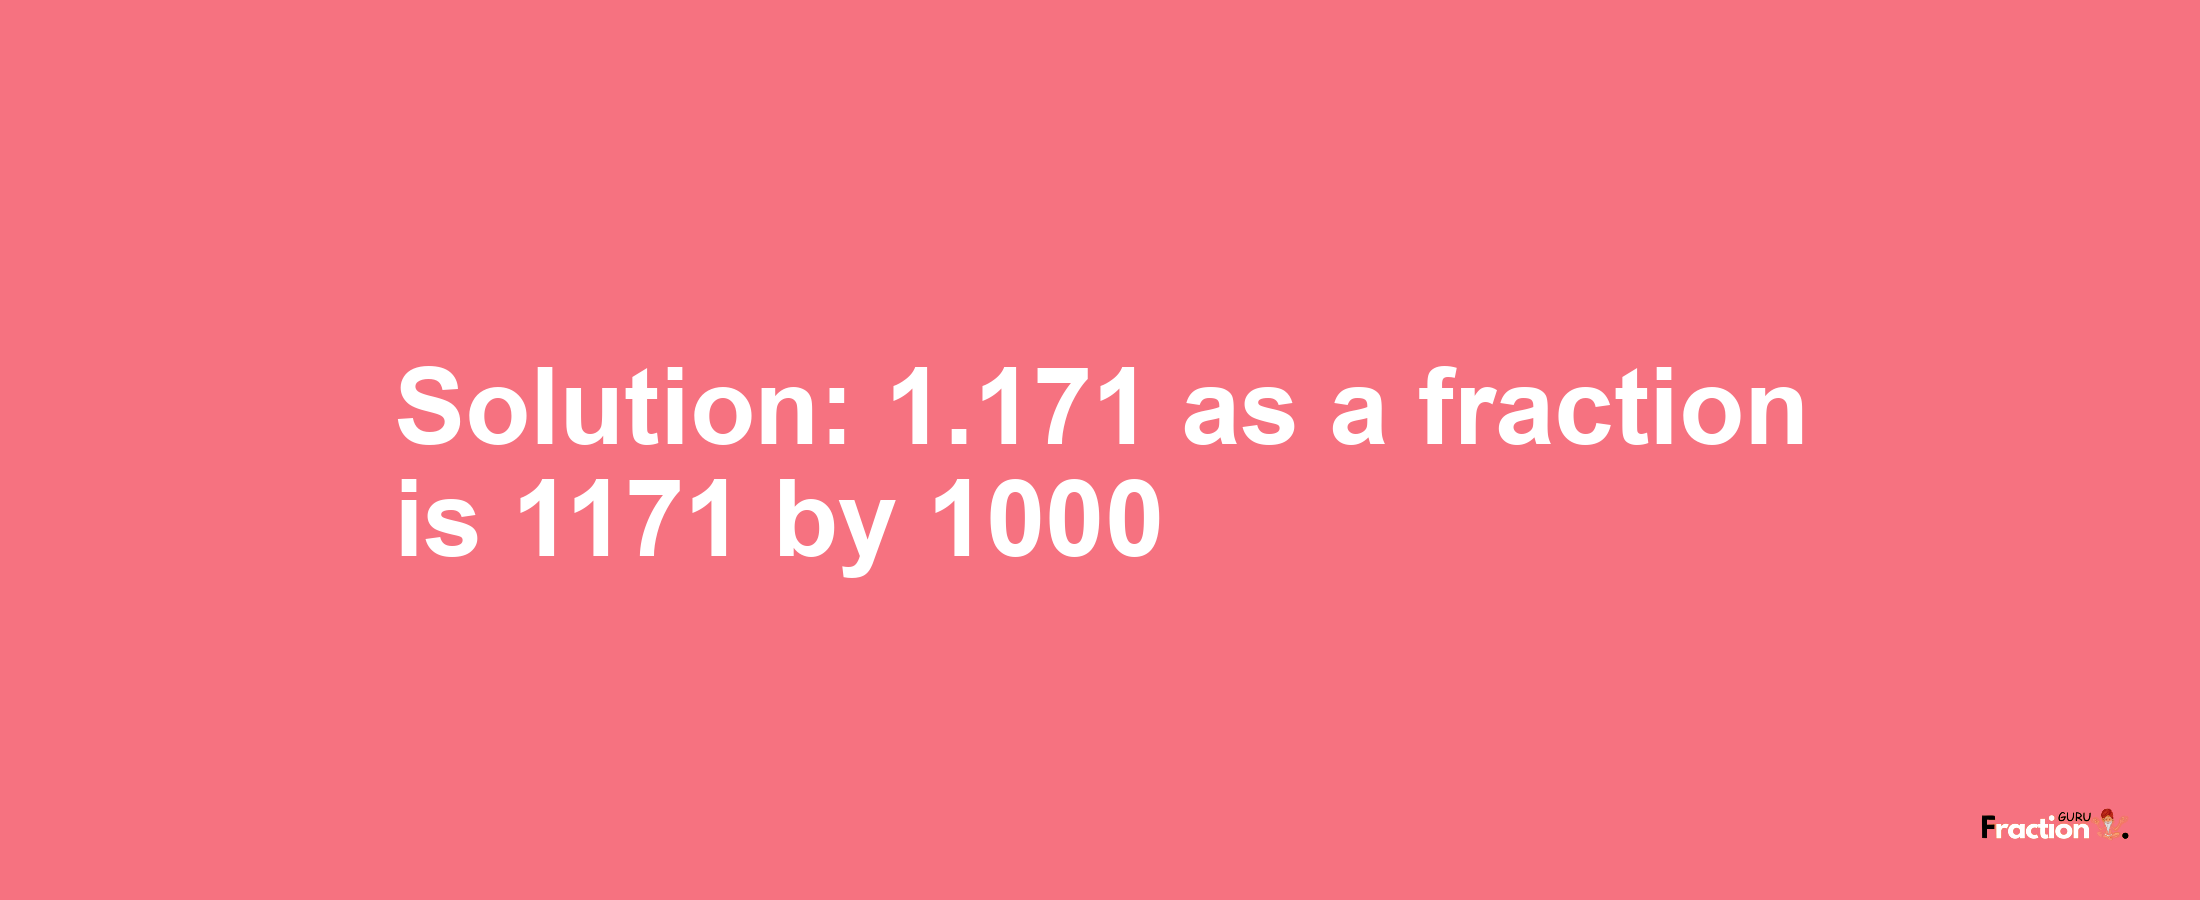 Solution:1.171 as a fraction is 1171/1000